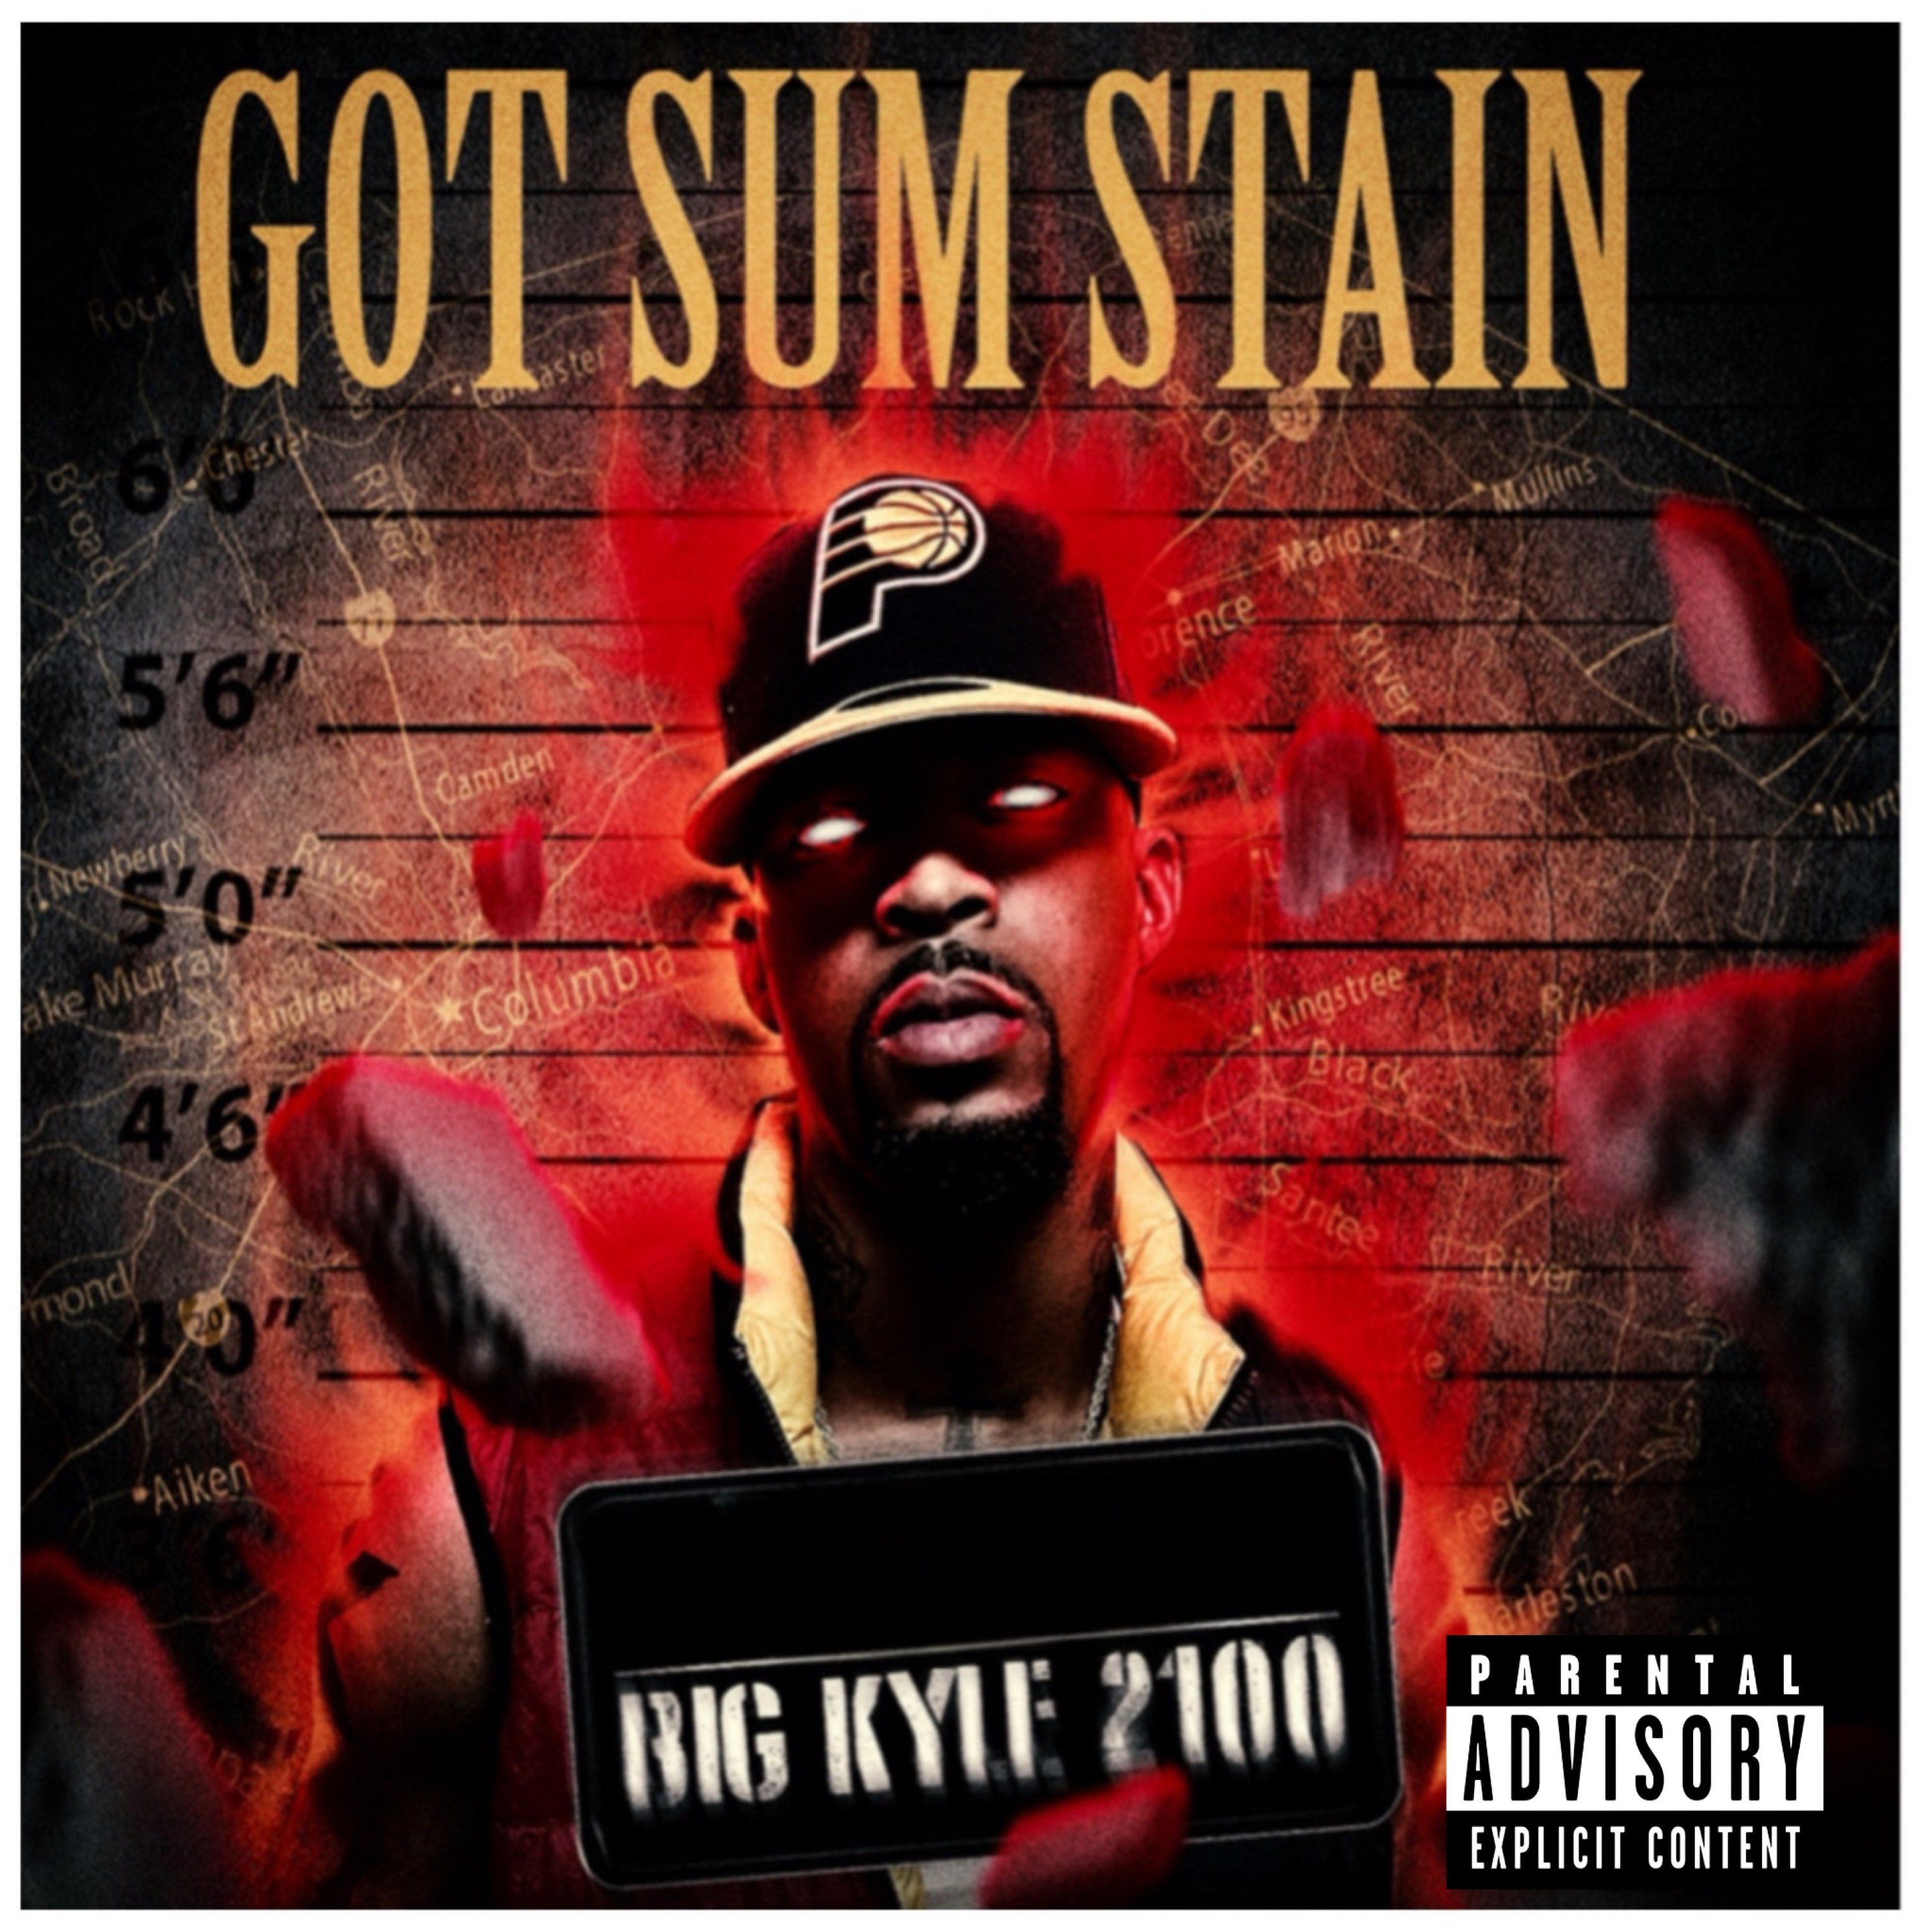 Big Kyle 2100 - Got Sum Stain EP Cover Art